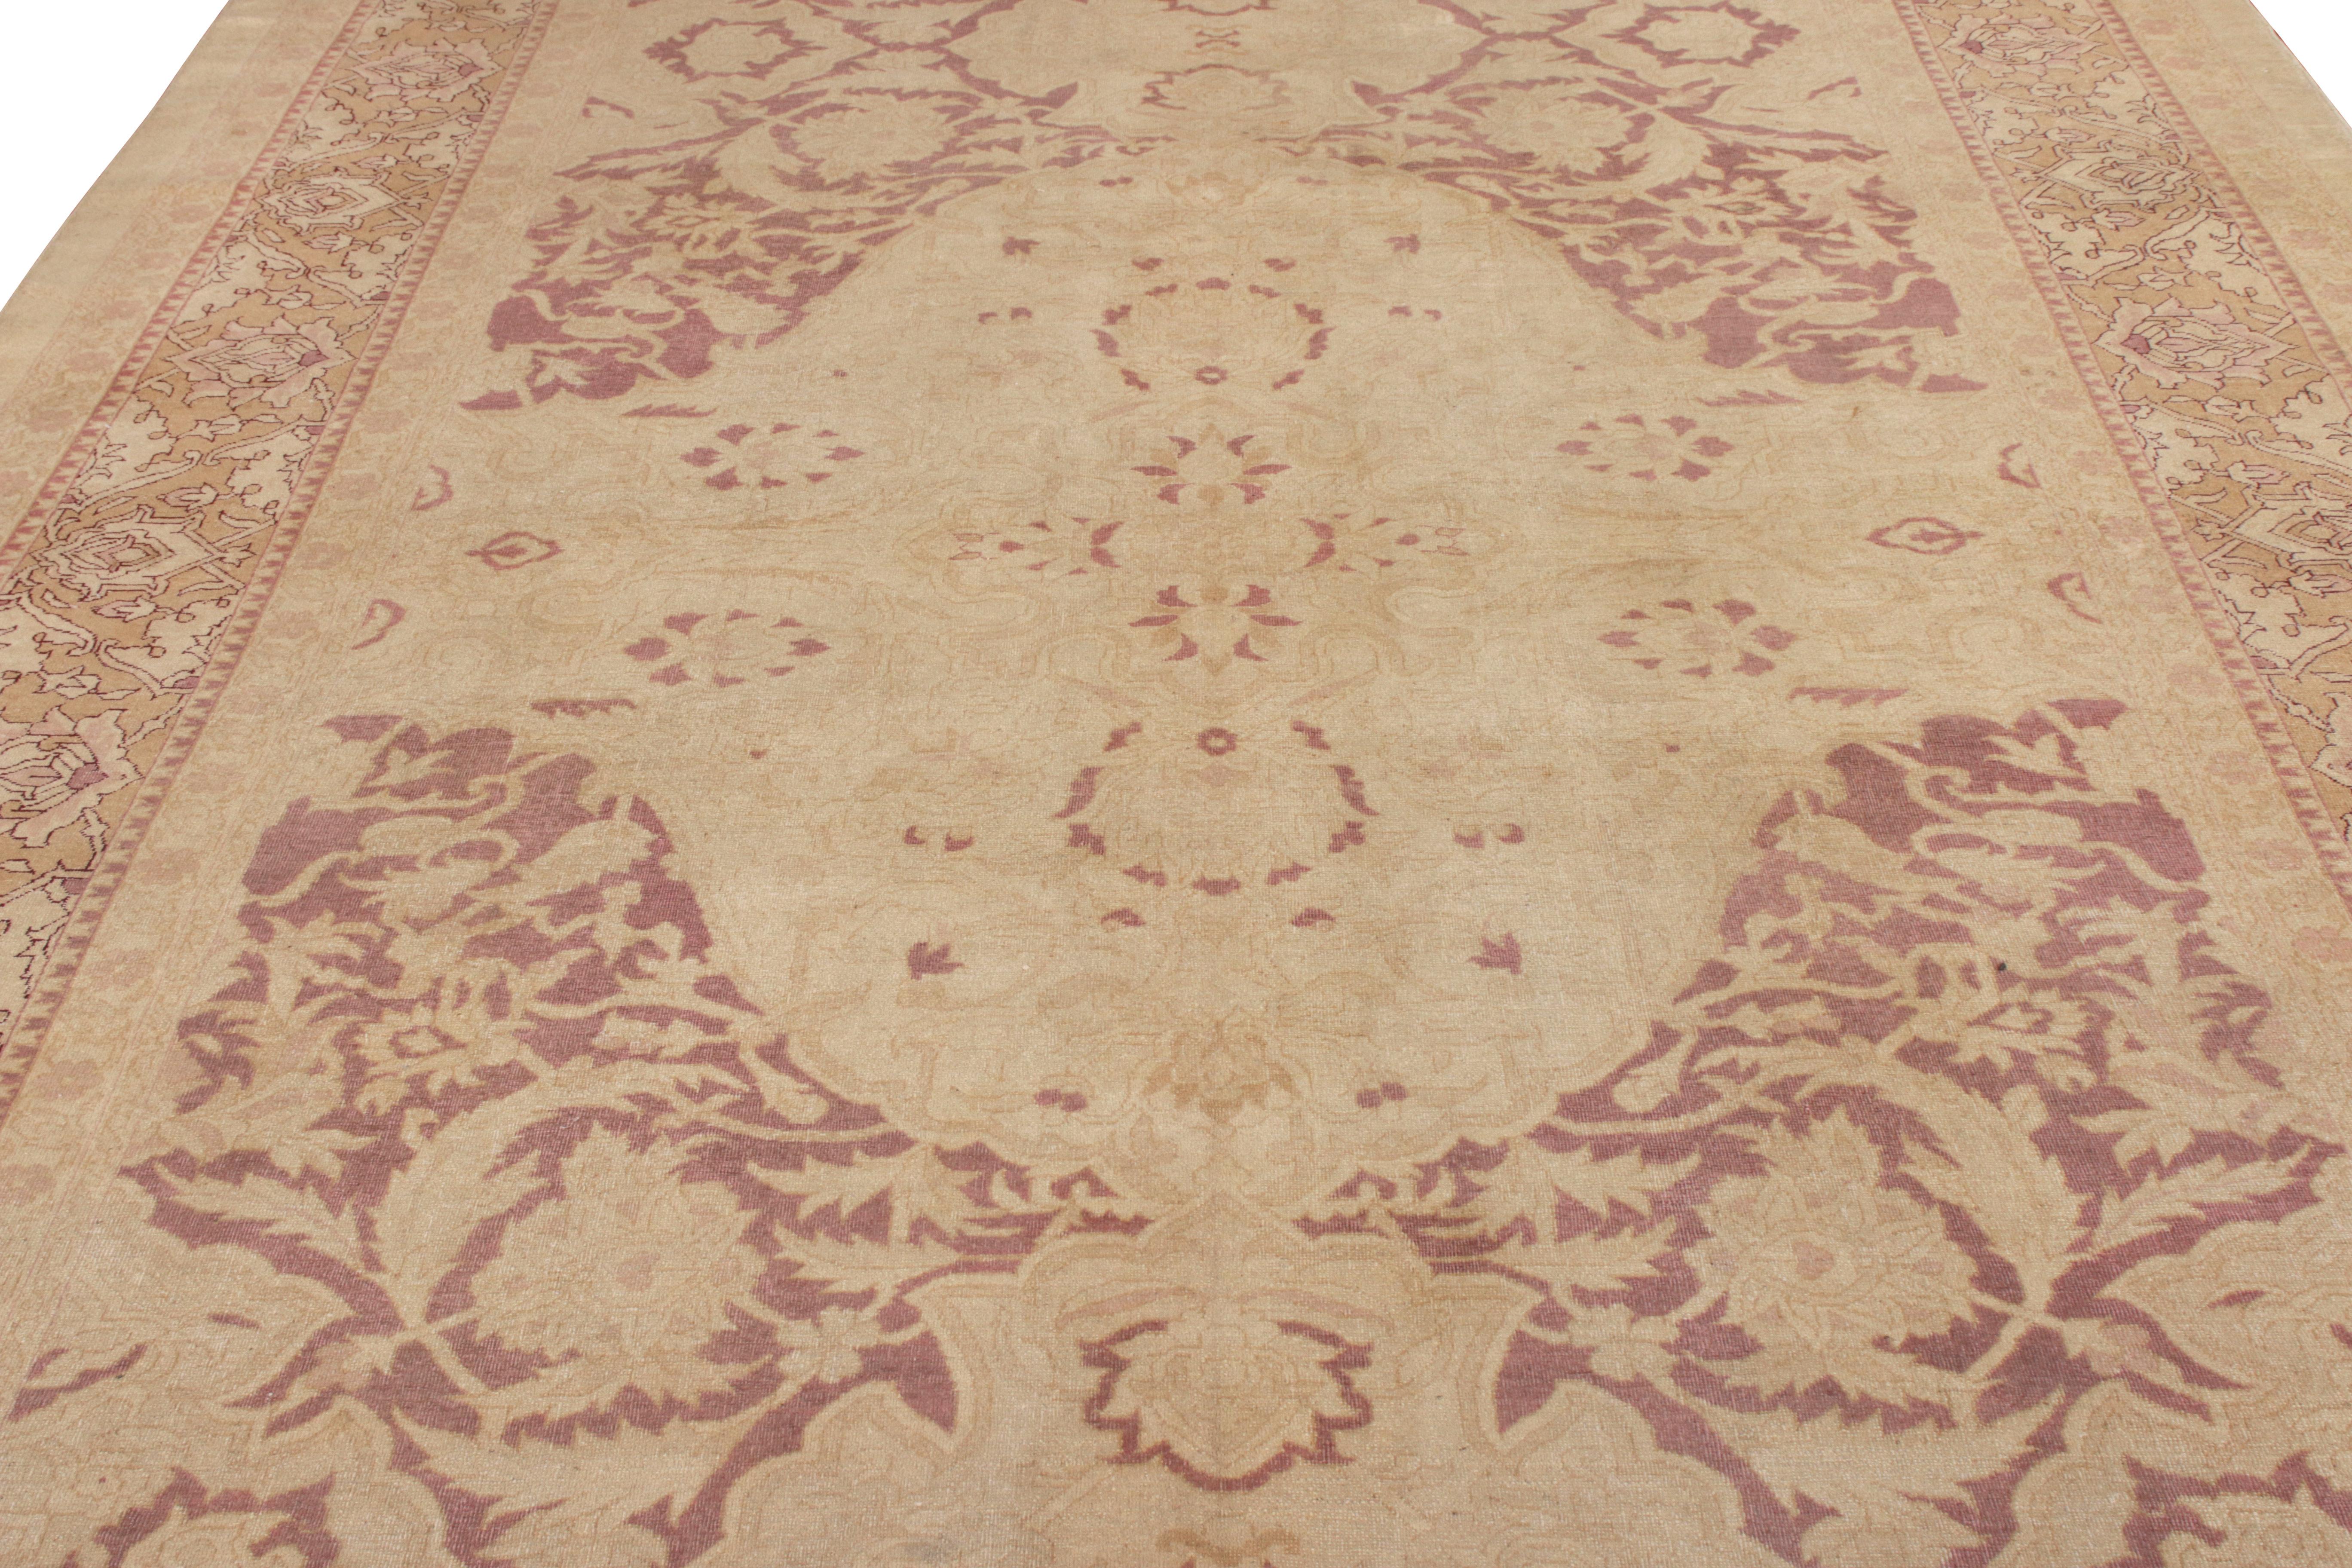 Indian Hand-Knotted Antique Amritsar Rug in Beige-Brown Floral Pattern For Sale